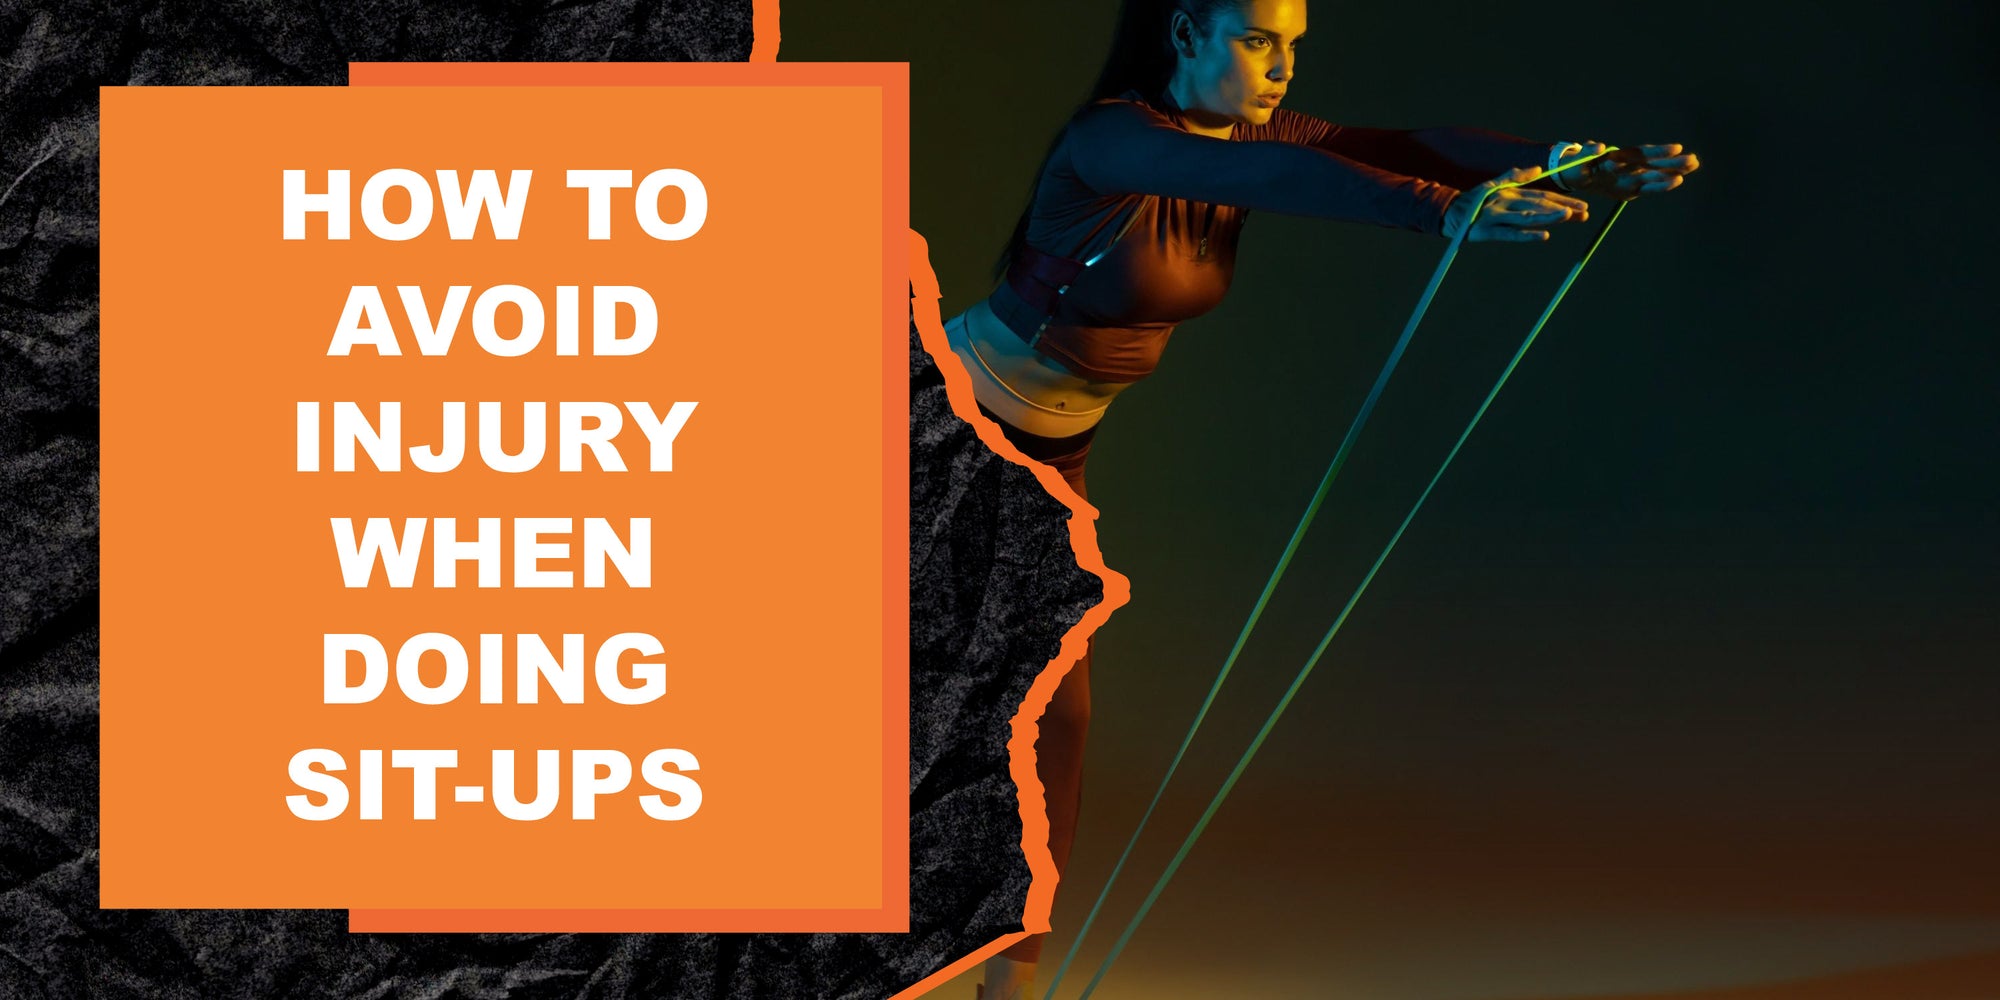 How to Avoid Injury When Doing Sit-Ups